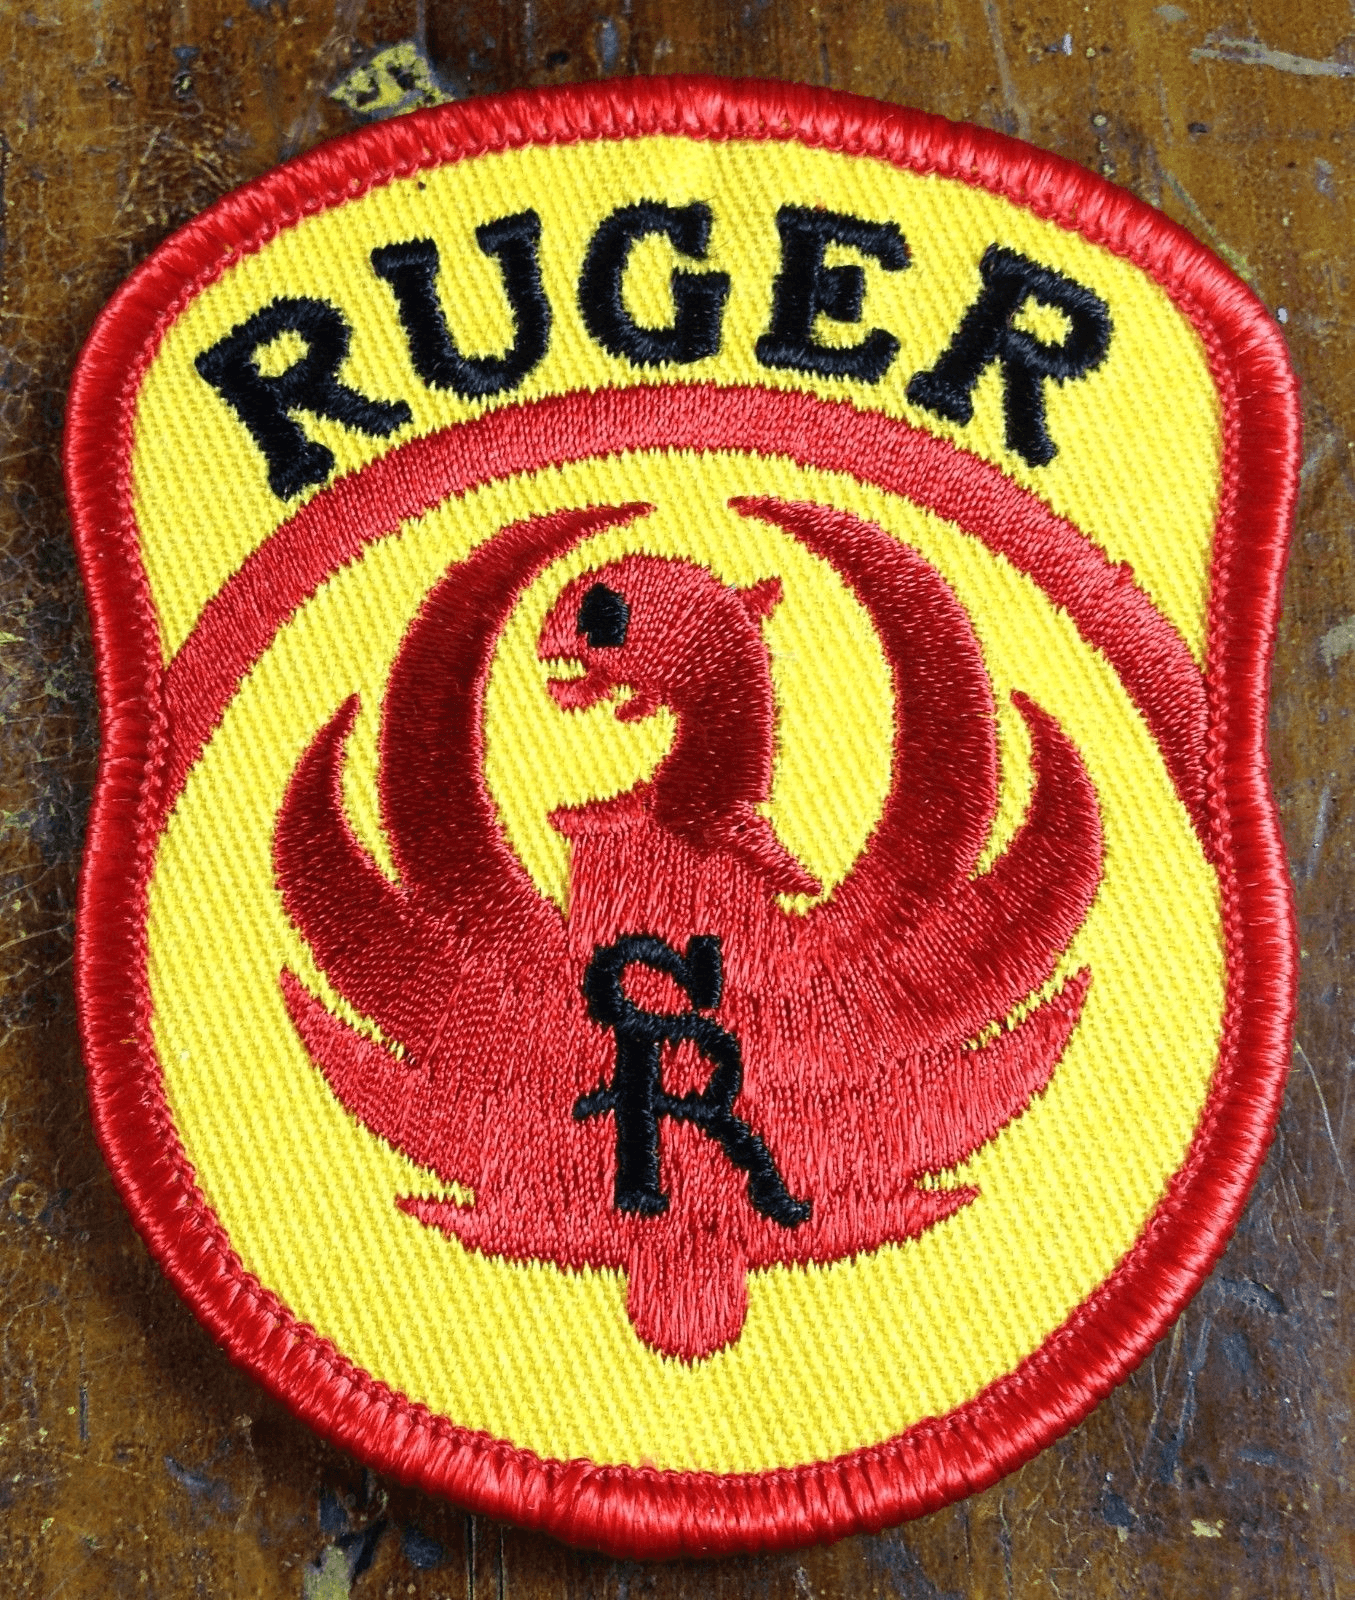 Yellow Bird with Red Circle Logo - Ruger Firearms Guns Company Yellow with Red Phoenix Bird Logo ...